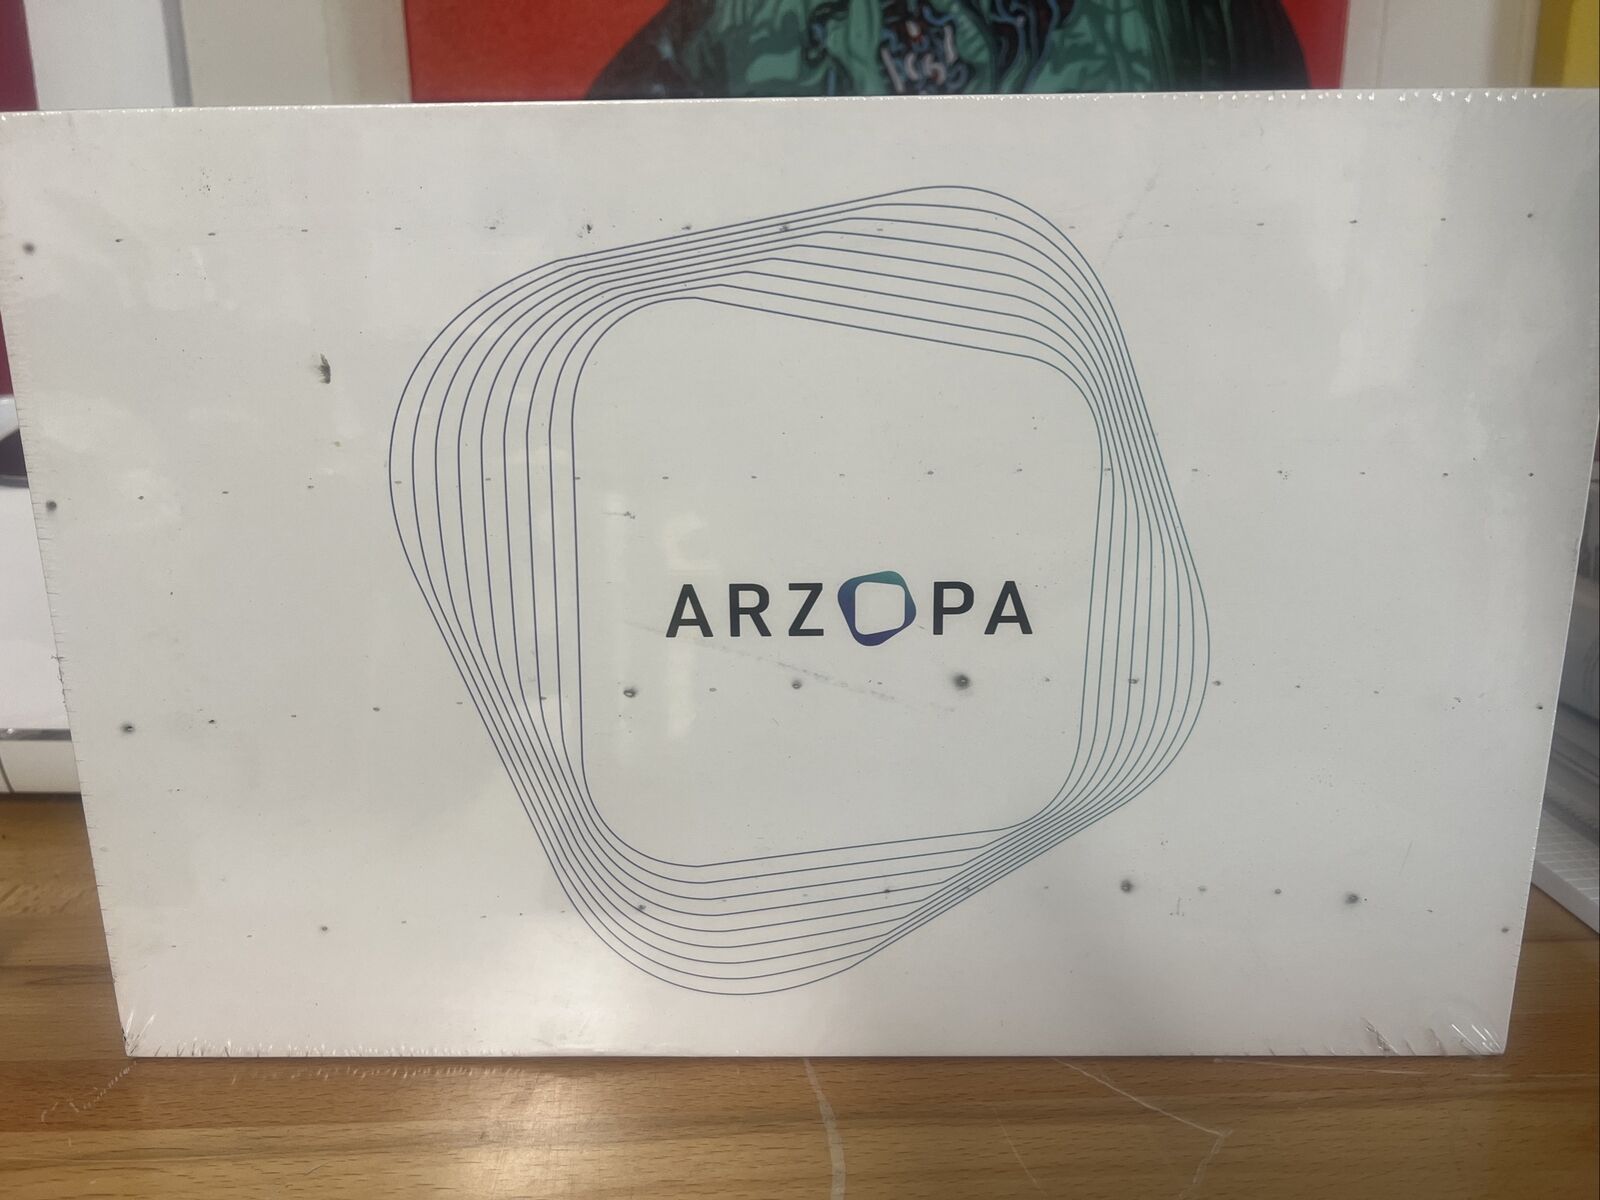 Arzopa 15.6 inch Widescreen LCD Monitor